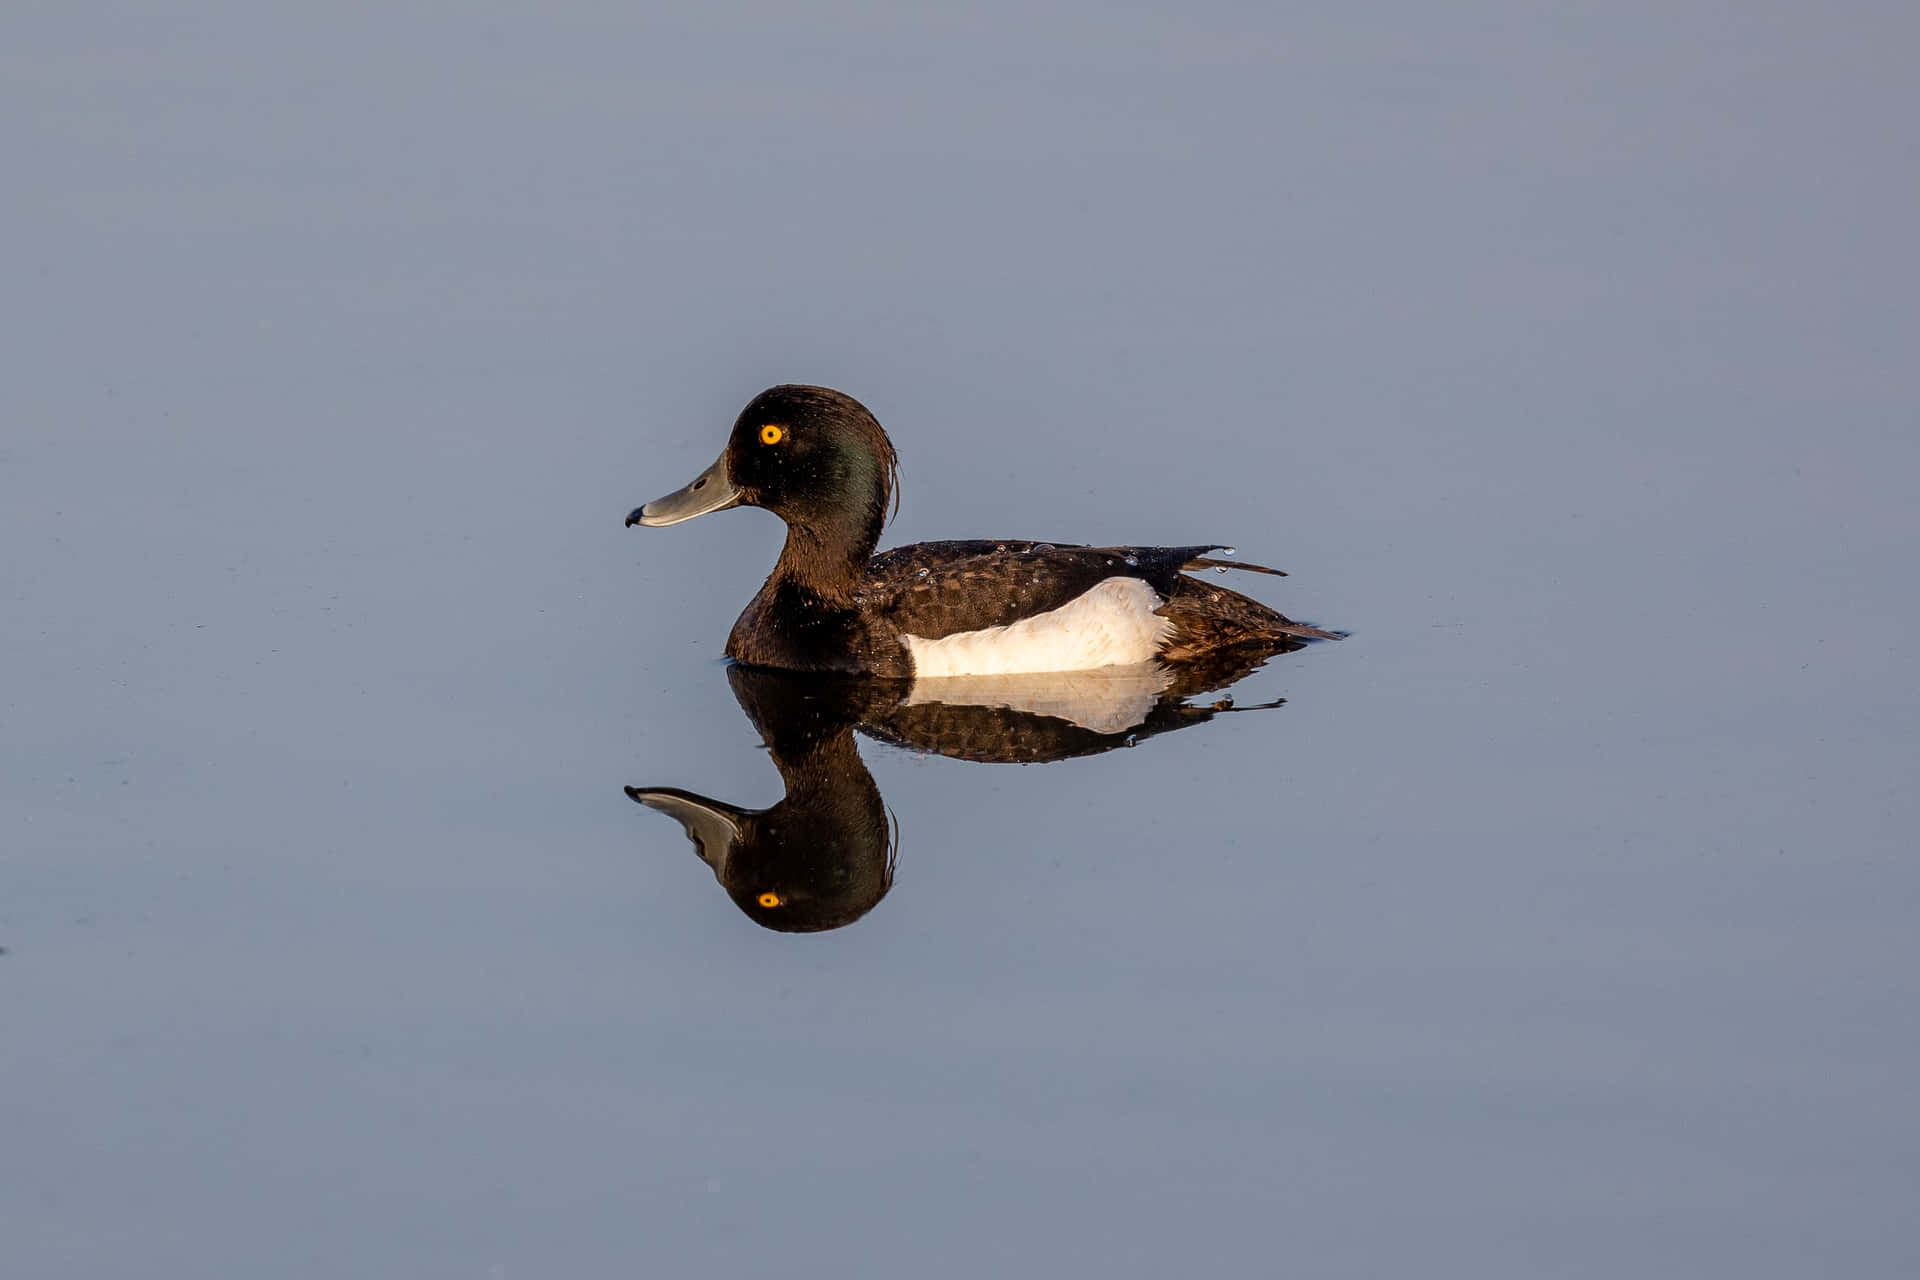 "An Up-Close Look at a Diving Duck"